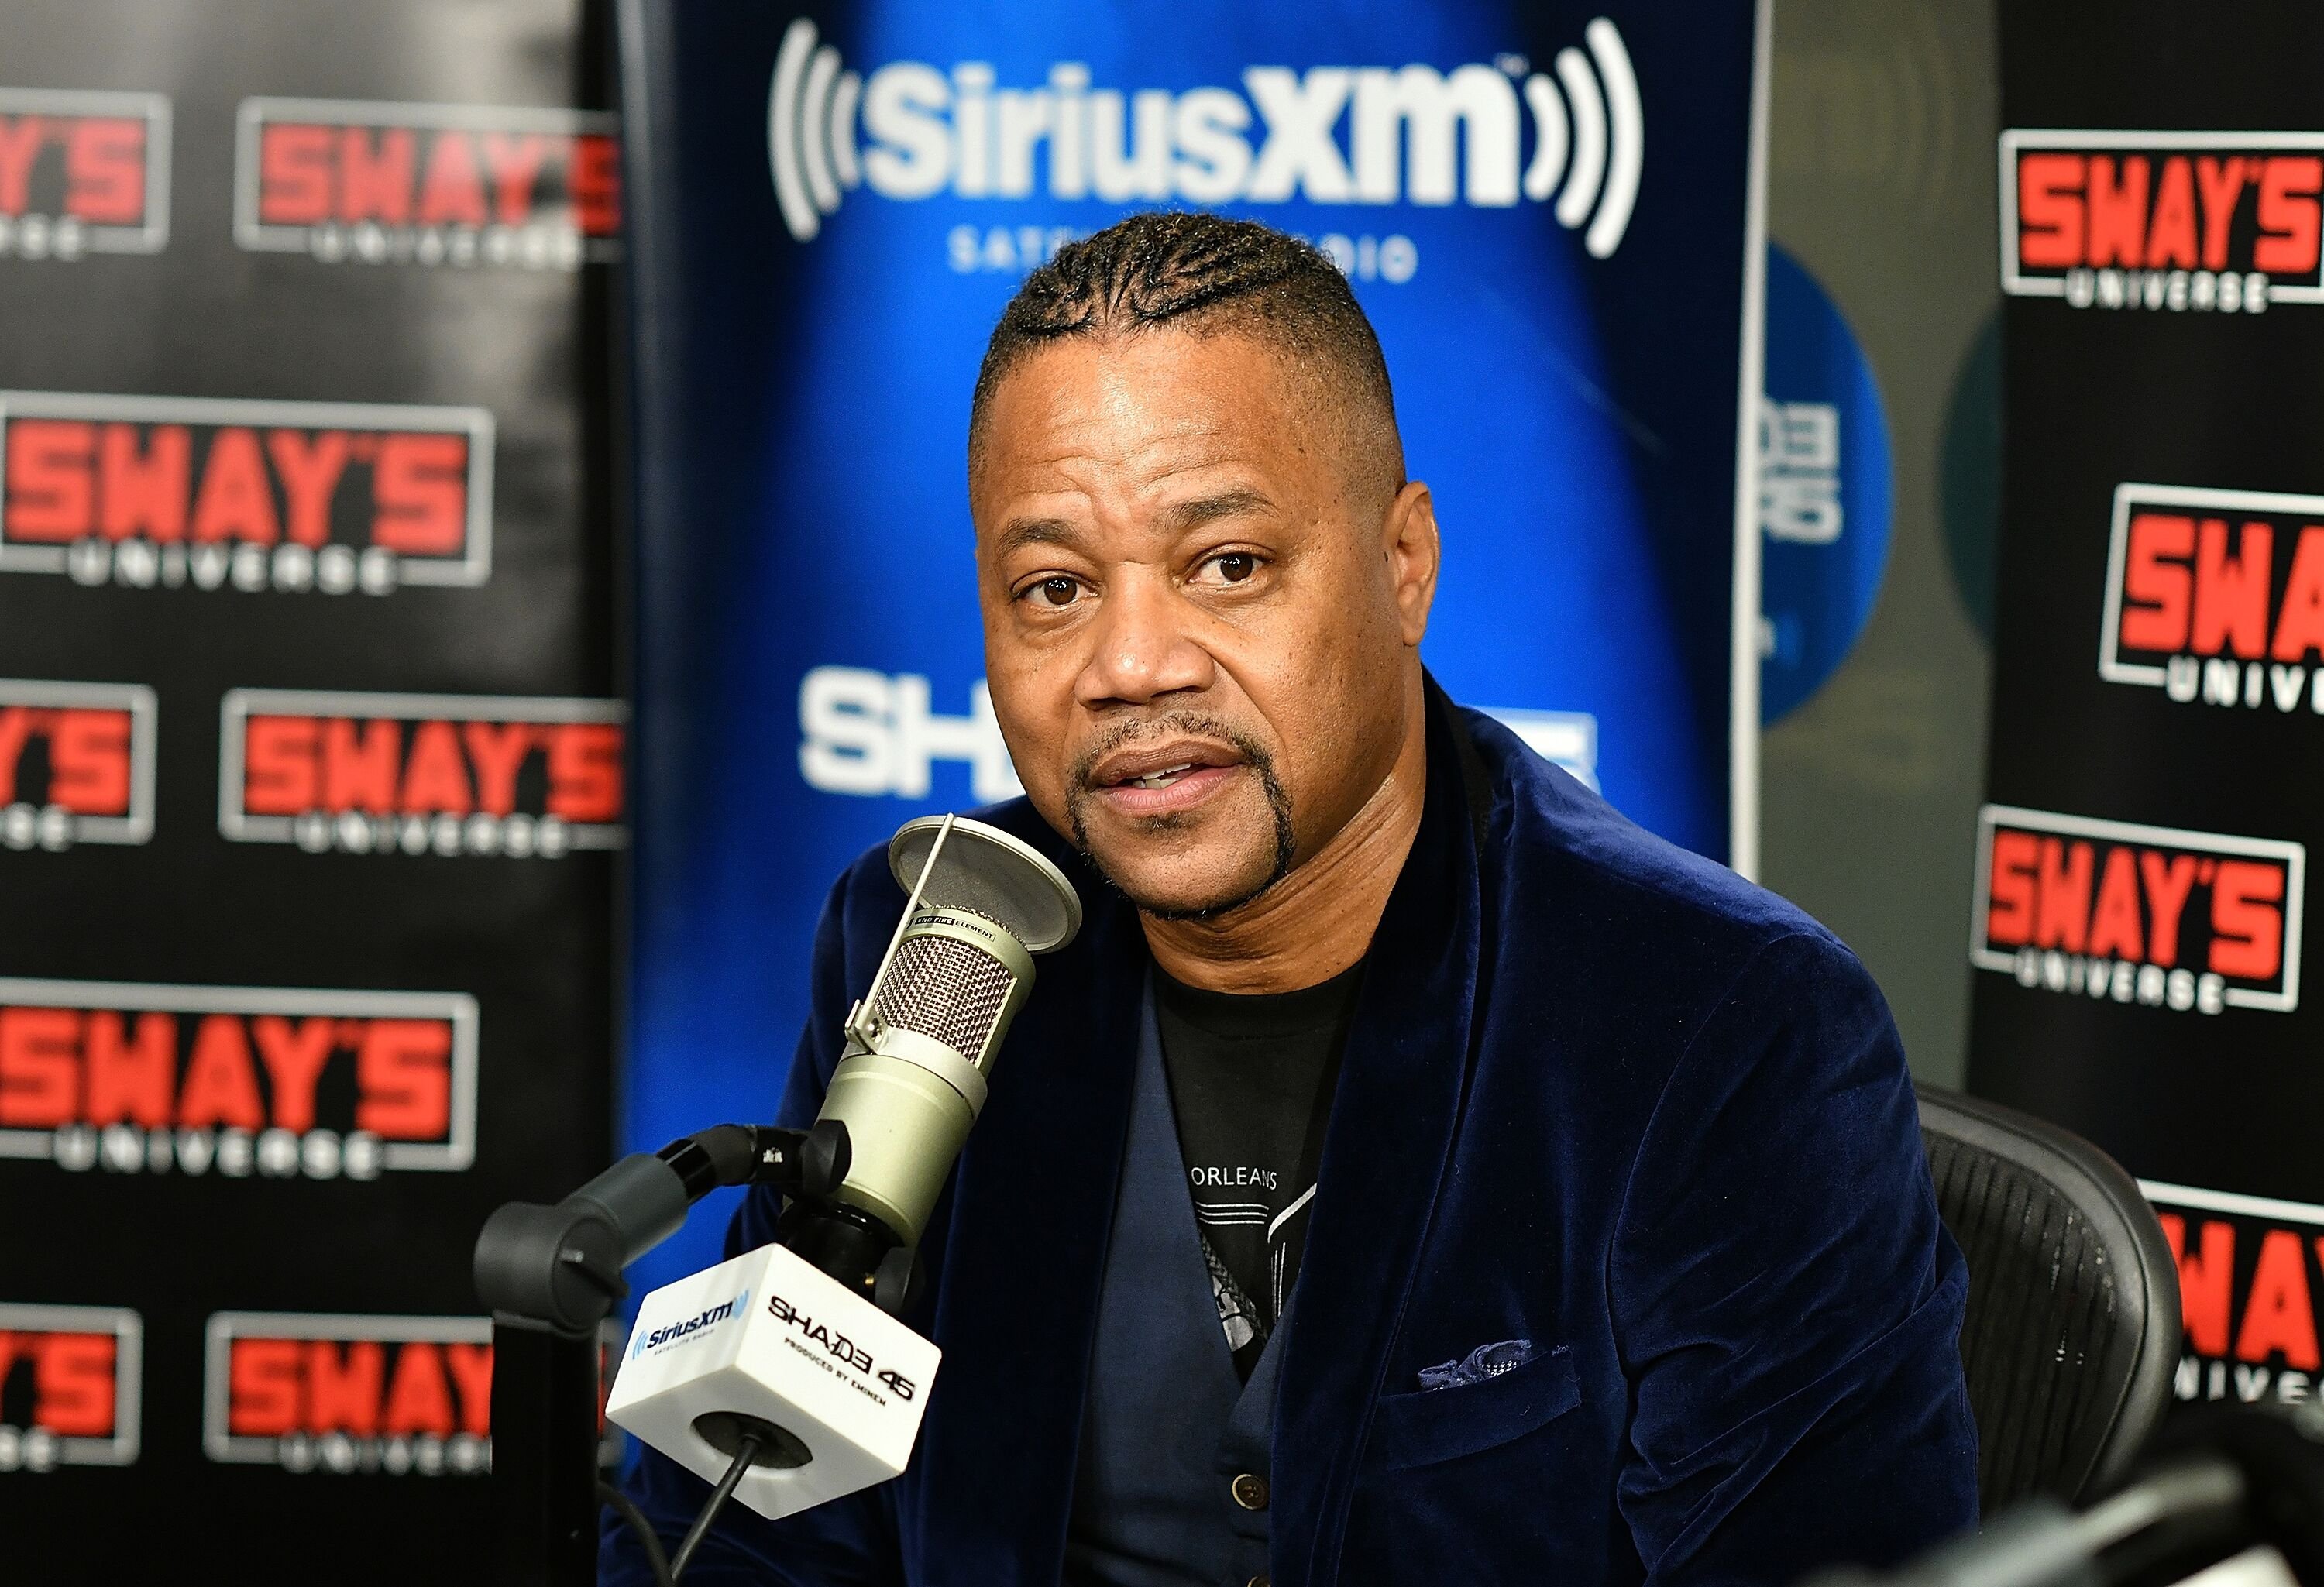 Cuba Gooding Jr. at a SiriusXM Interview | Source: Getty Images/GlobalImagesUkraine